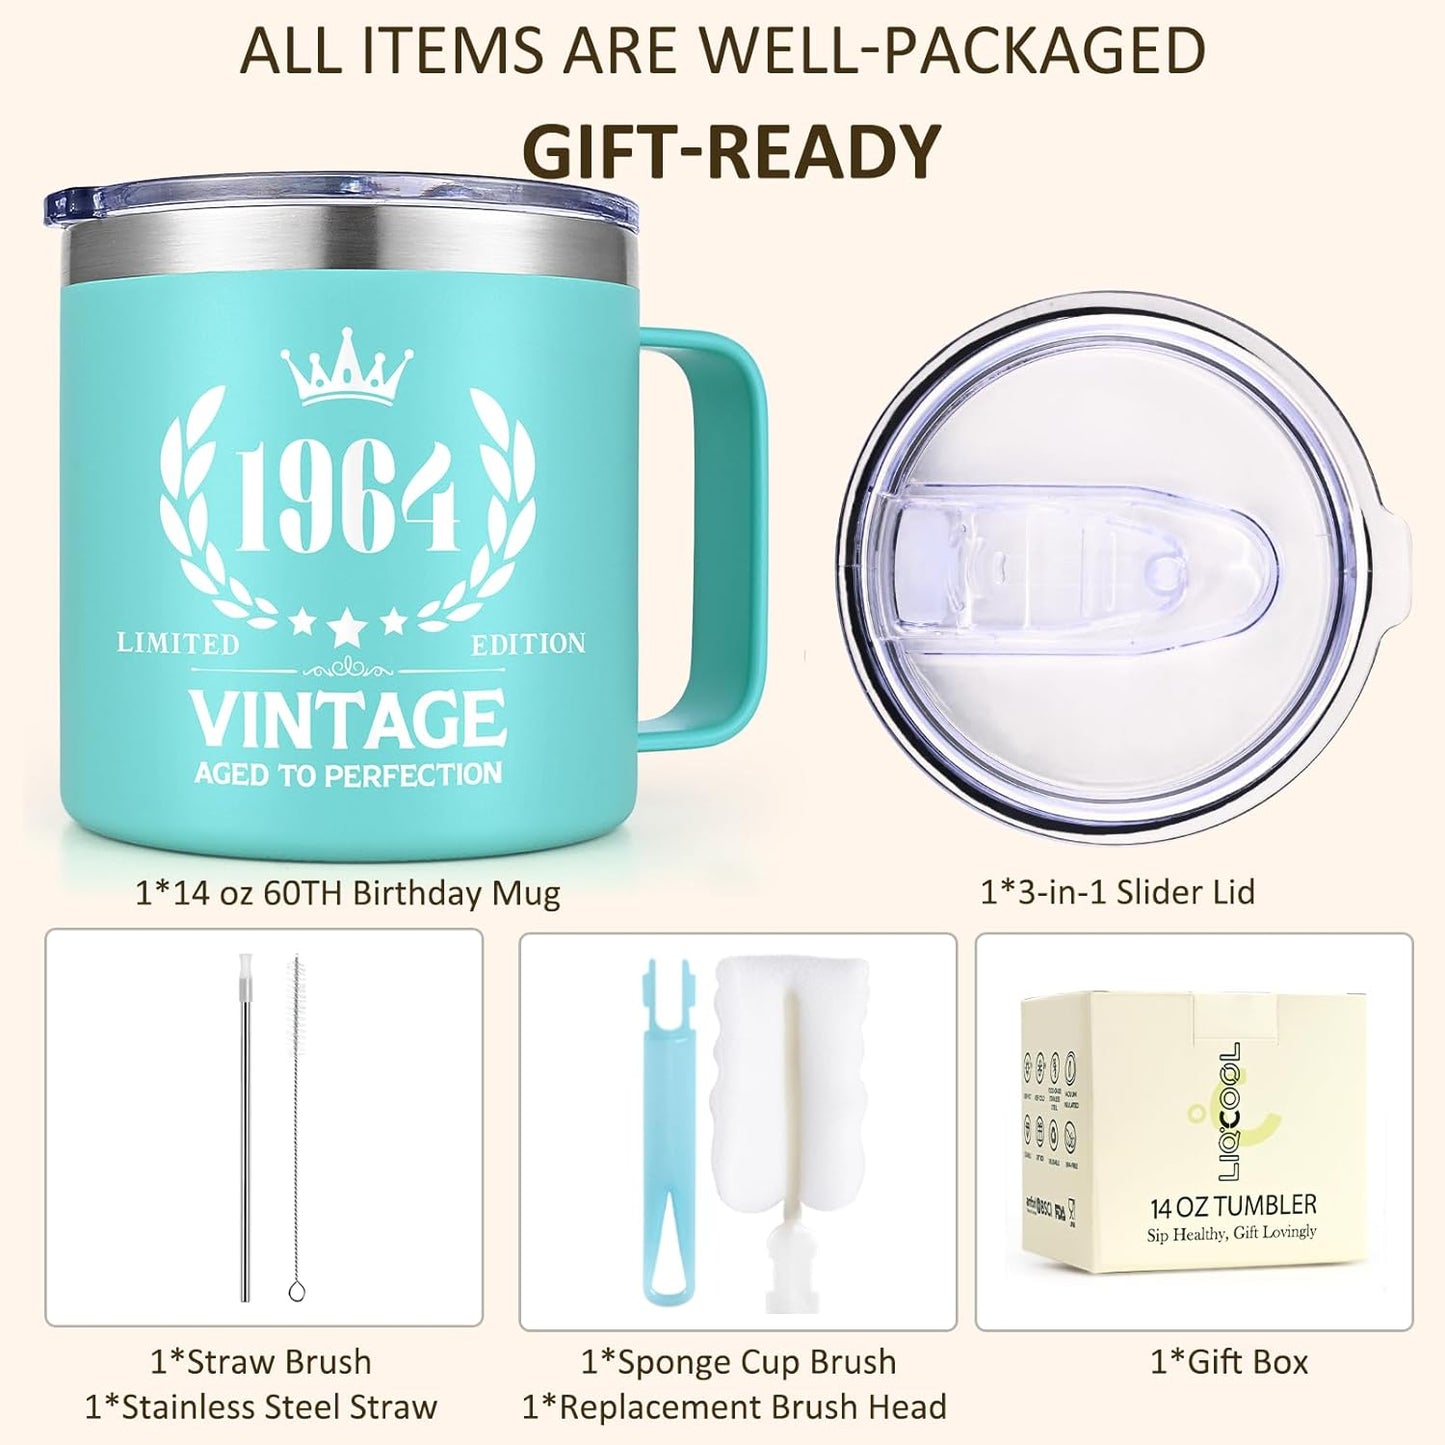 60th Birthday Gifts for Women, Vintage 1964 Birthday Gift Ideas for 60 Year Old Woman, Vintage 1964 Insulated Mug 14oz, 1964 Birthday Gifts for Mom, Wife, Friends